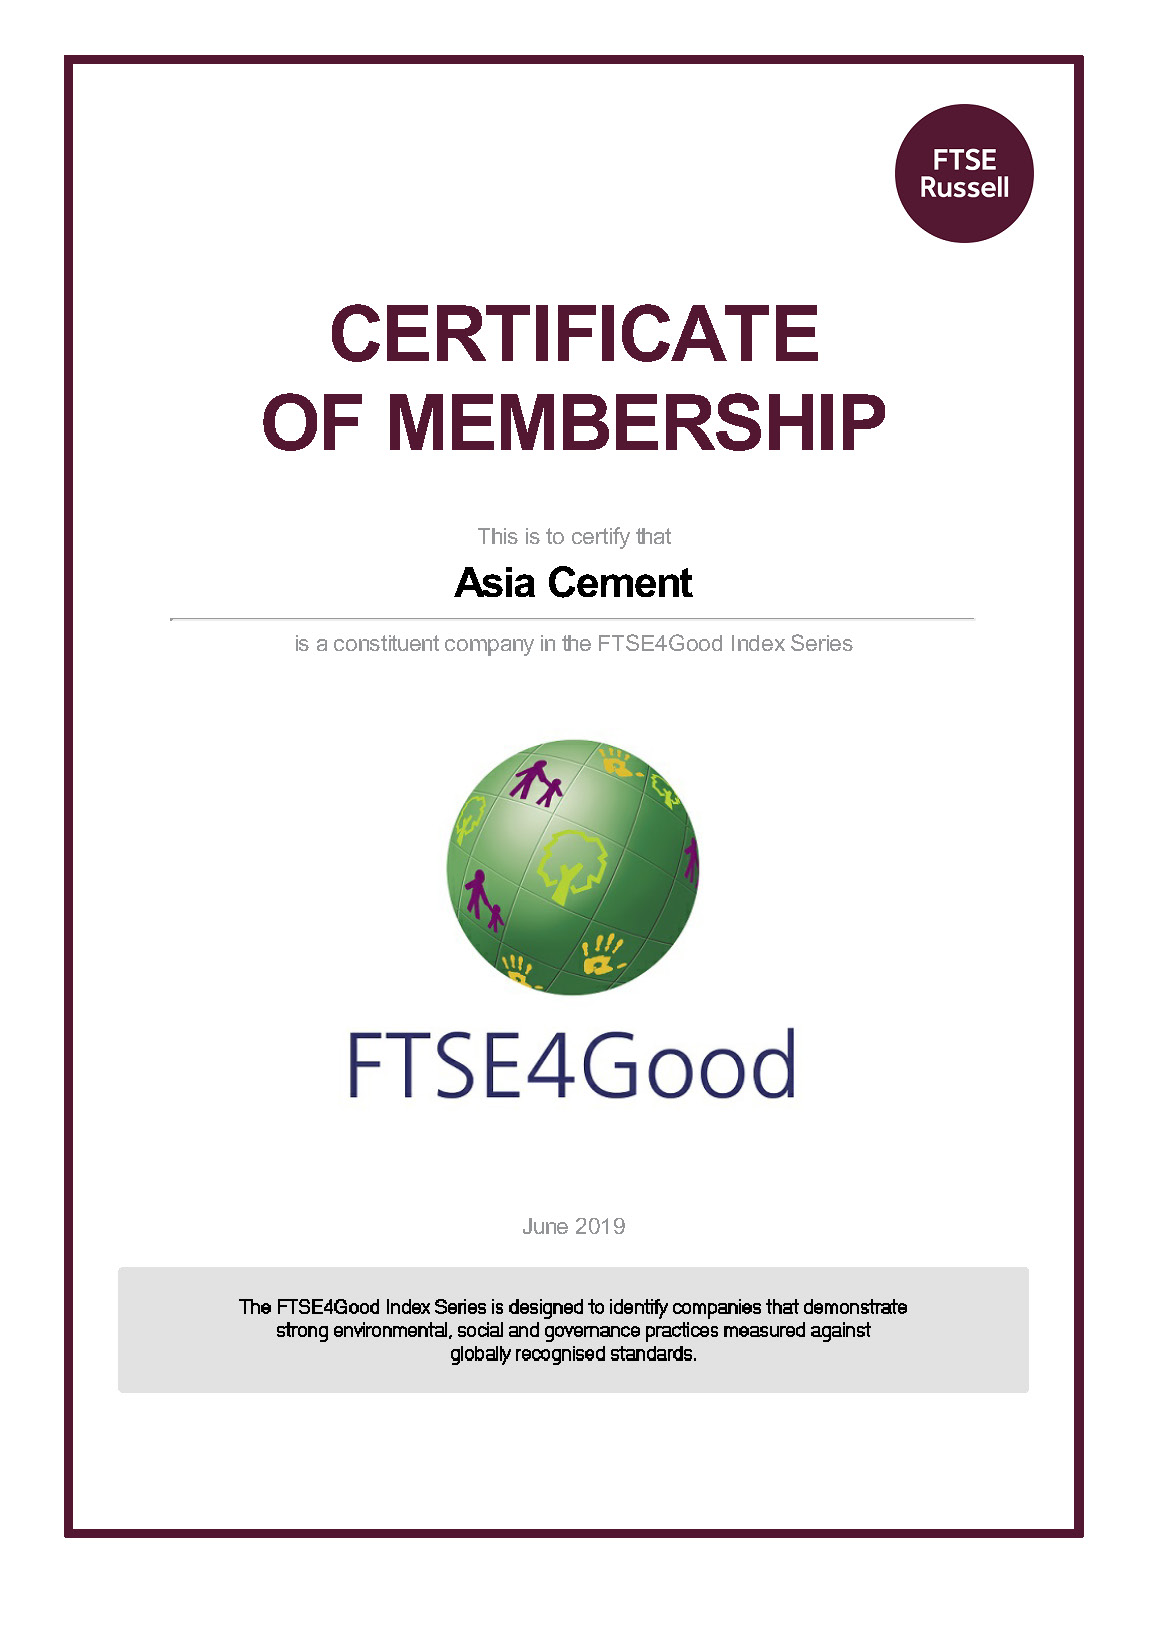 20190730 Asia Cement FTSE4Good Certificate